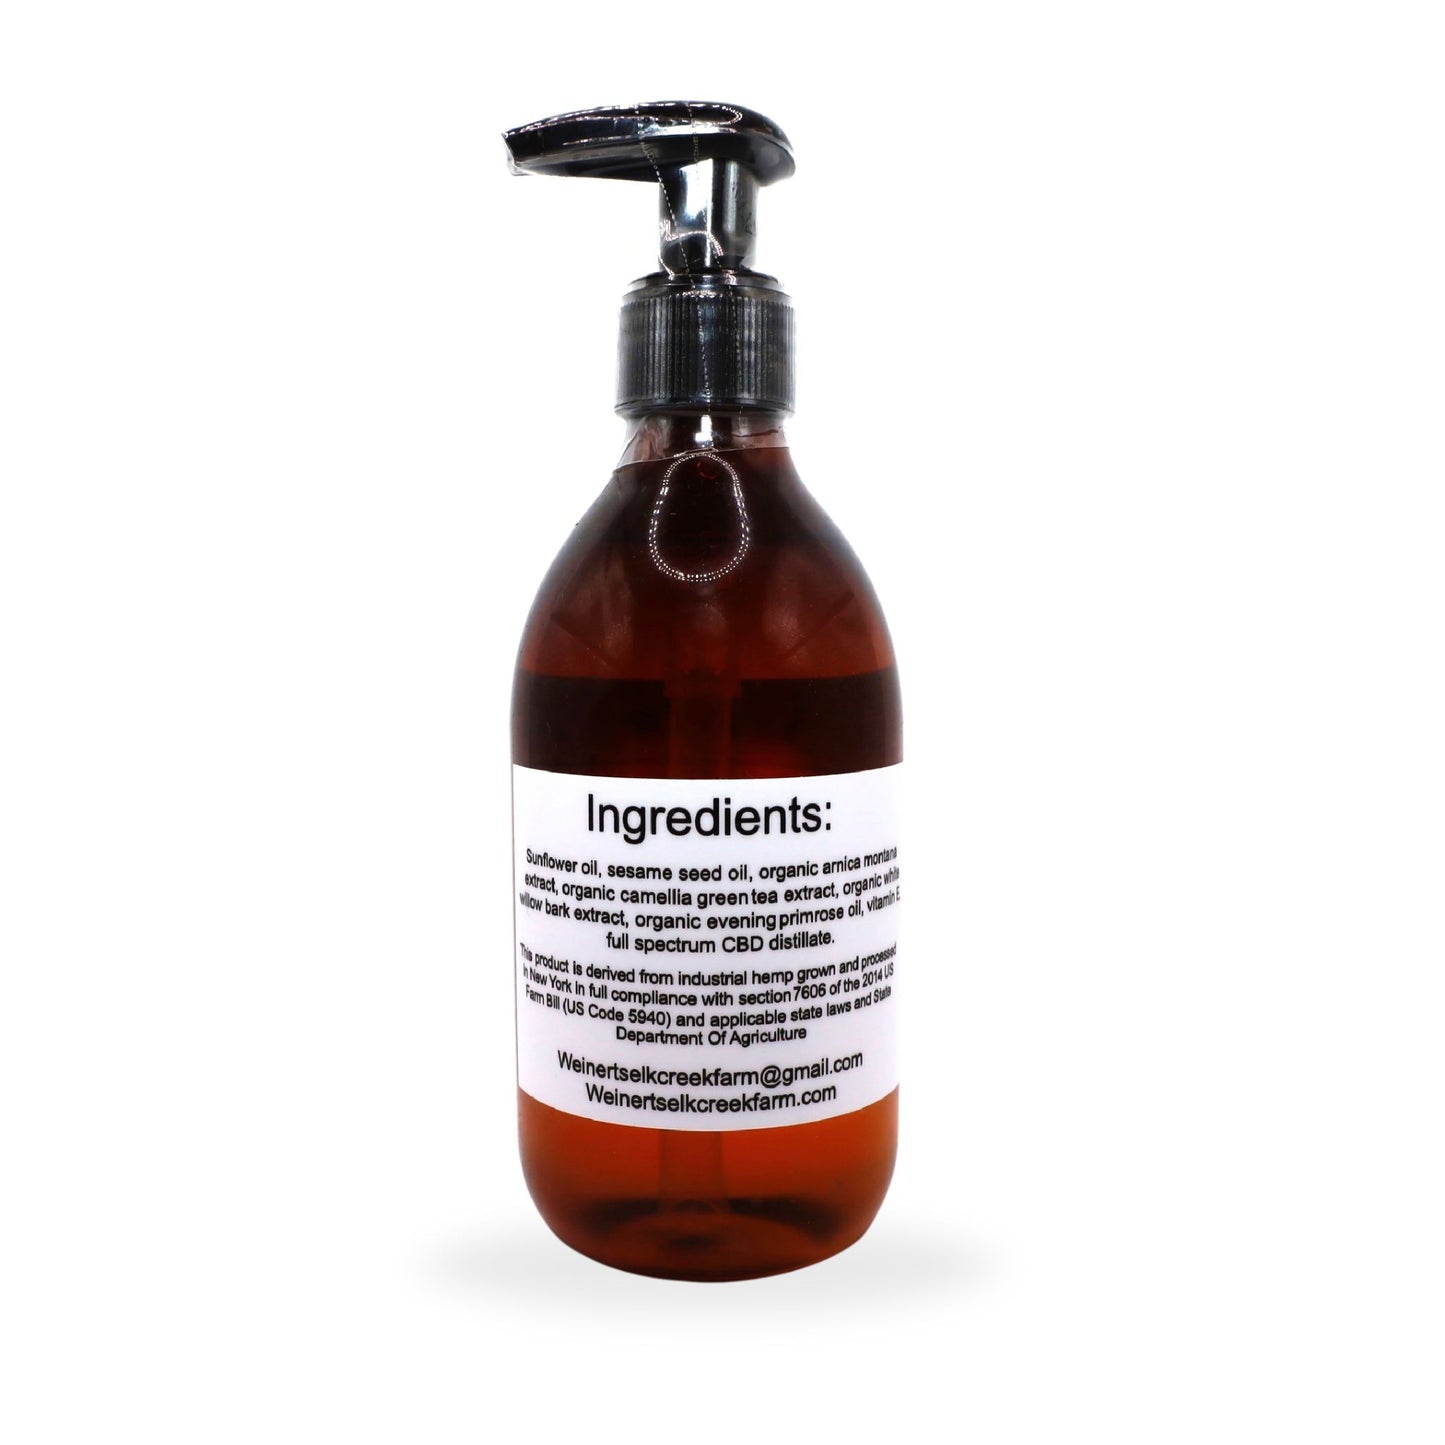 The back of a 1100mg bottle of premium CBD Massage Oil sitting on a white background. This CBD Massage oil is made with sunflower oil, sesame seed oil, full spctrum CBD oil